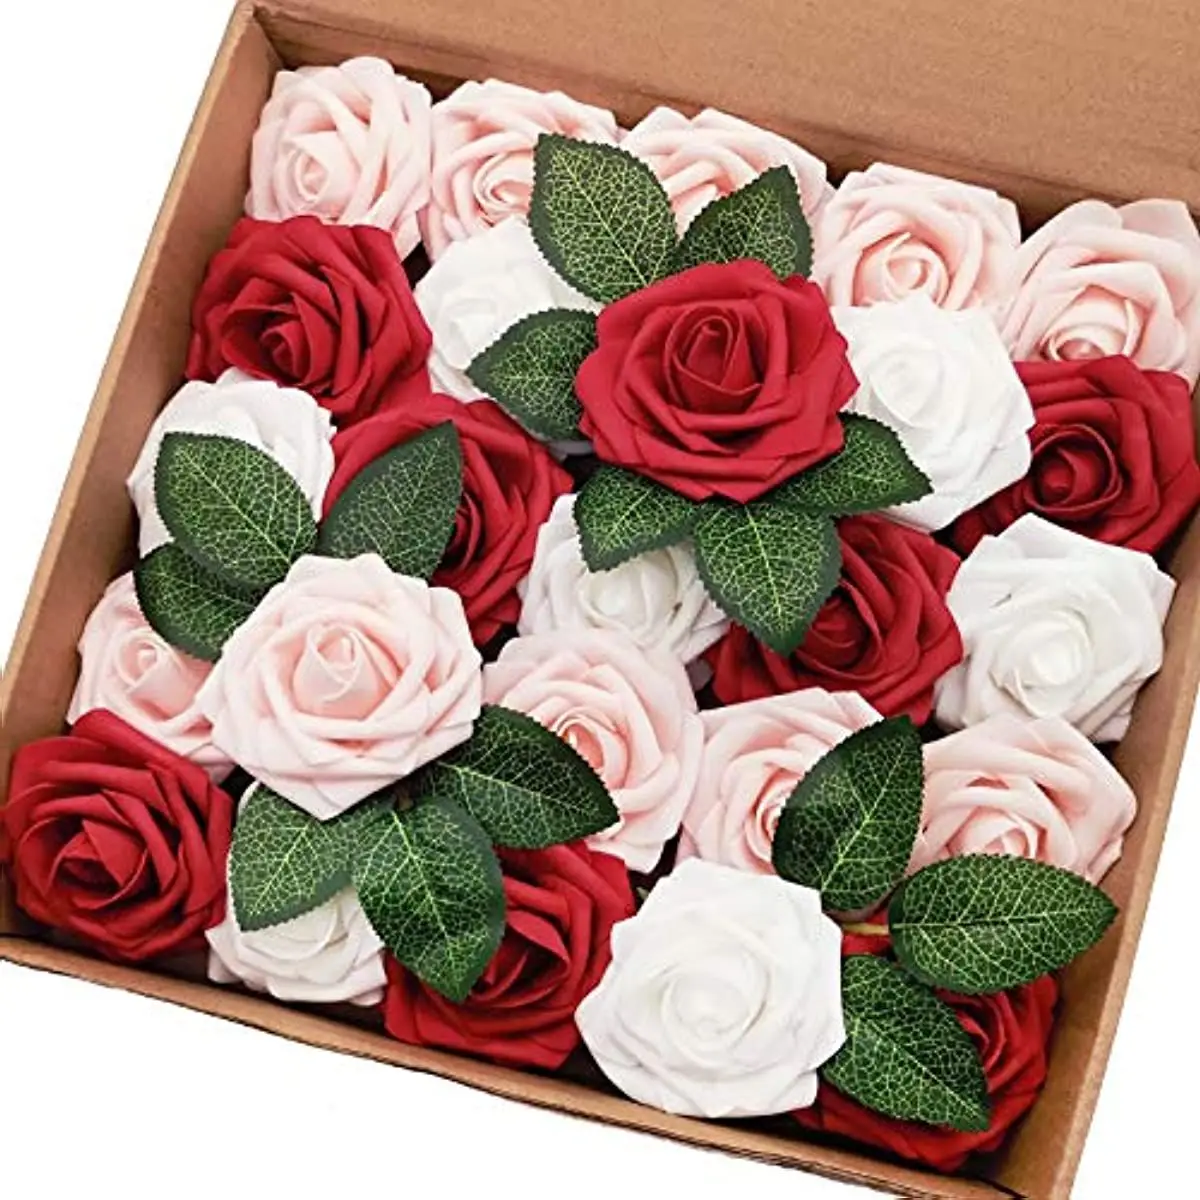 

Mefier Home Artificial Flowers 25pcs Real Looking Mixed Colors Dark Red Blush White Fake Roses with Stem for DIY Wedding